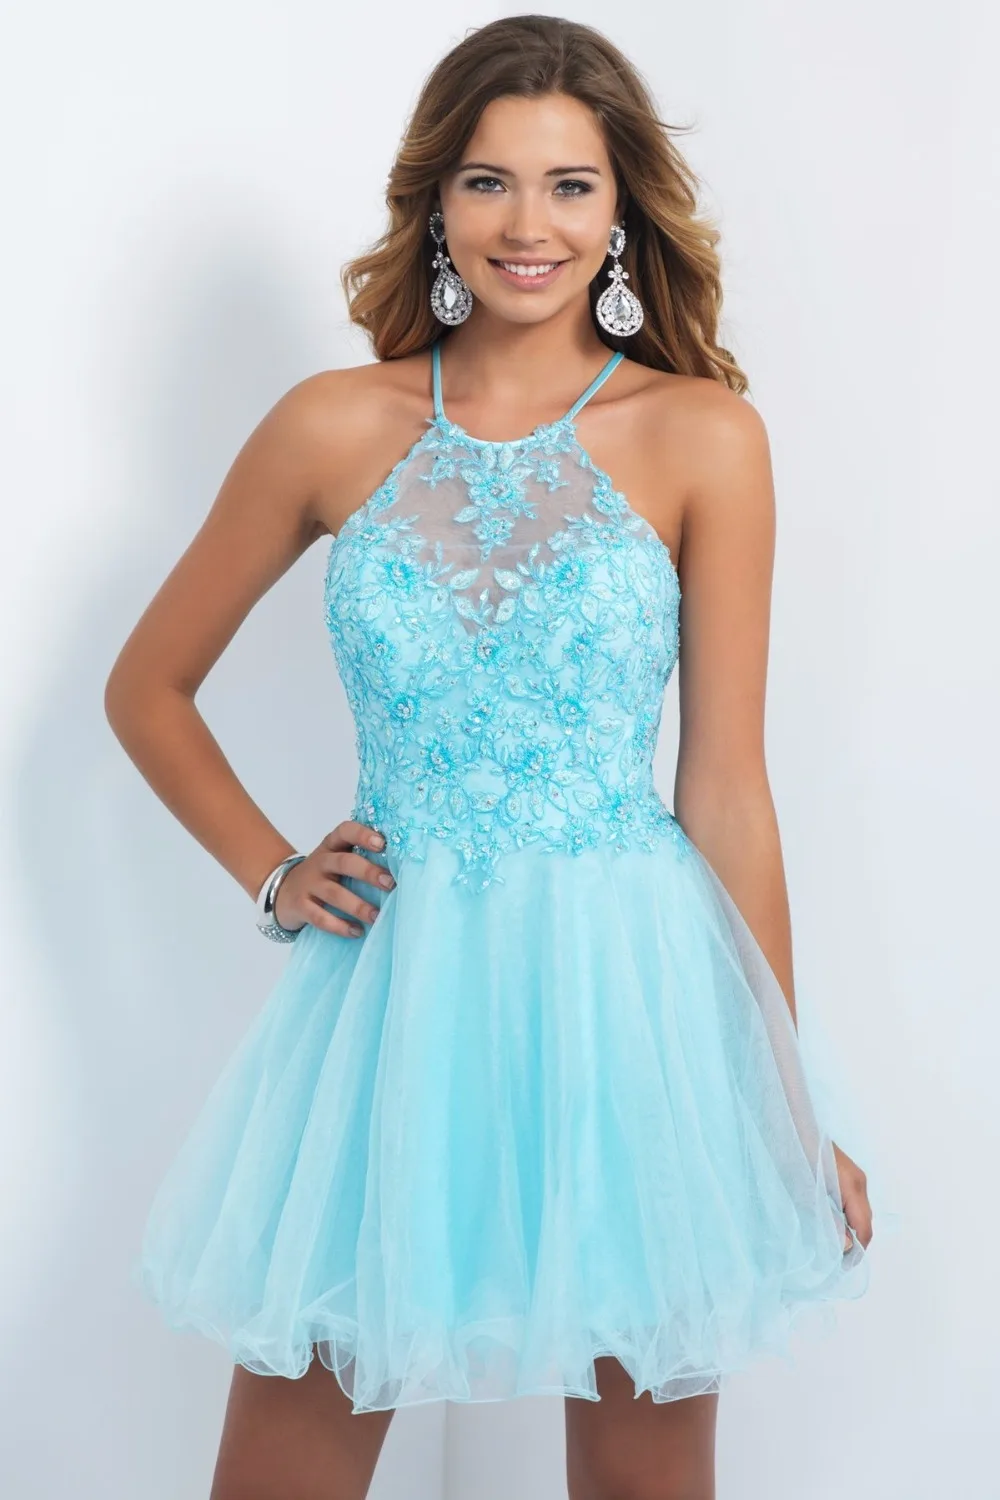 Compare Prices on Halter Homecoming Dress- Online Shopping/Buy Low ...